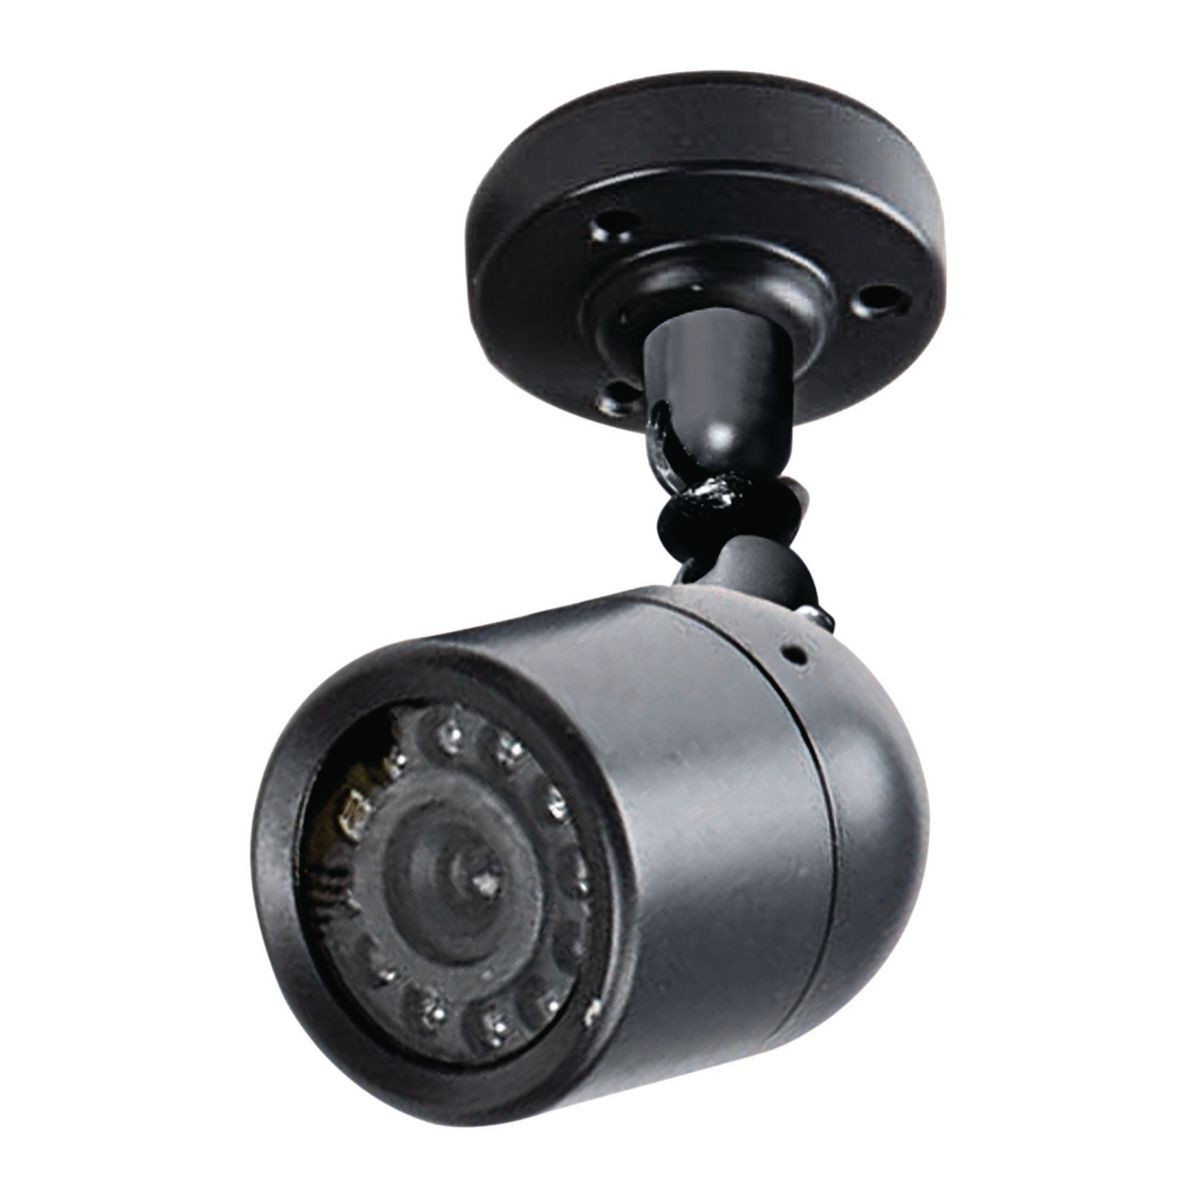 bunker hill wireless color security camera